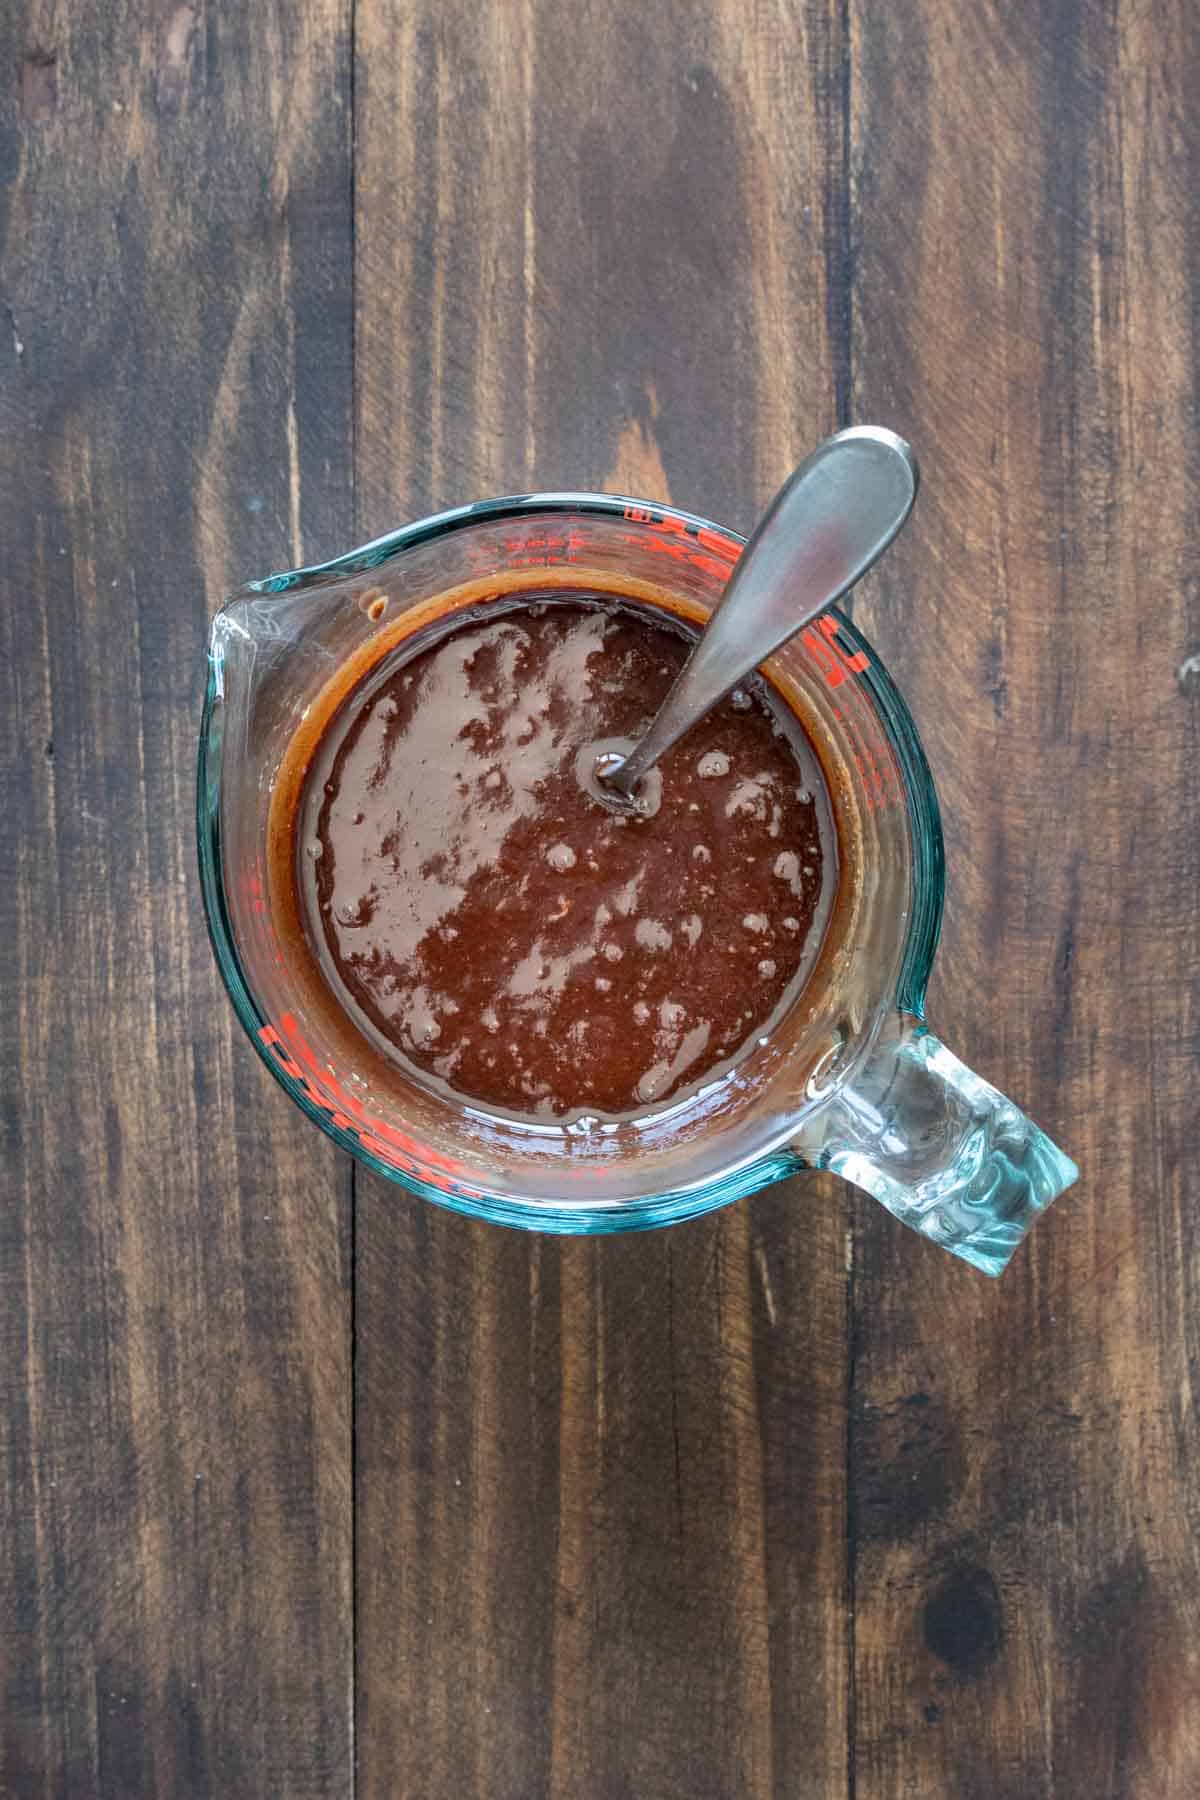 Top view of a glass measuring cup with melted chocolate and a spoon inside